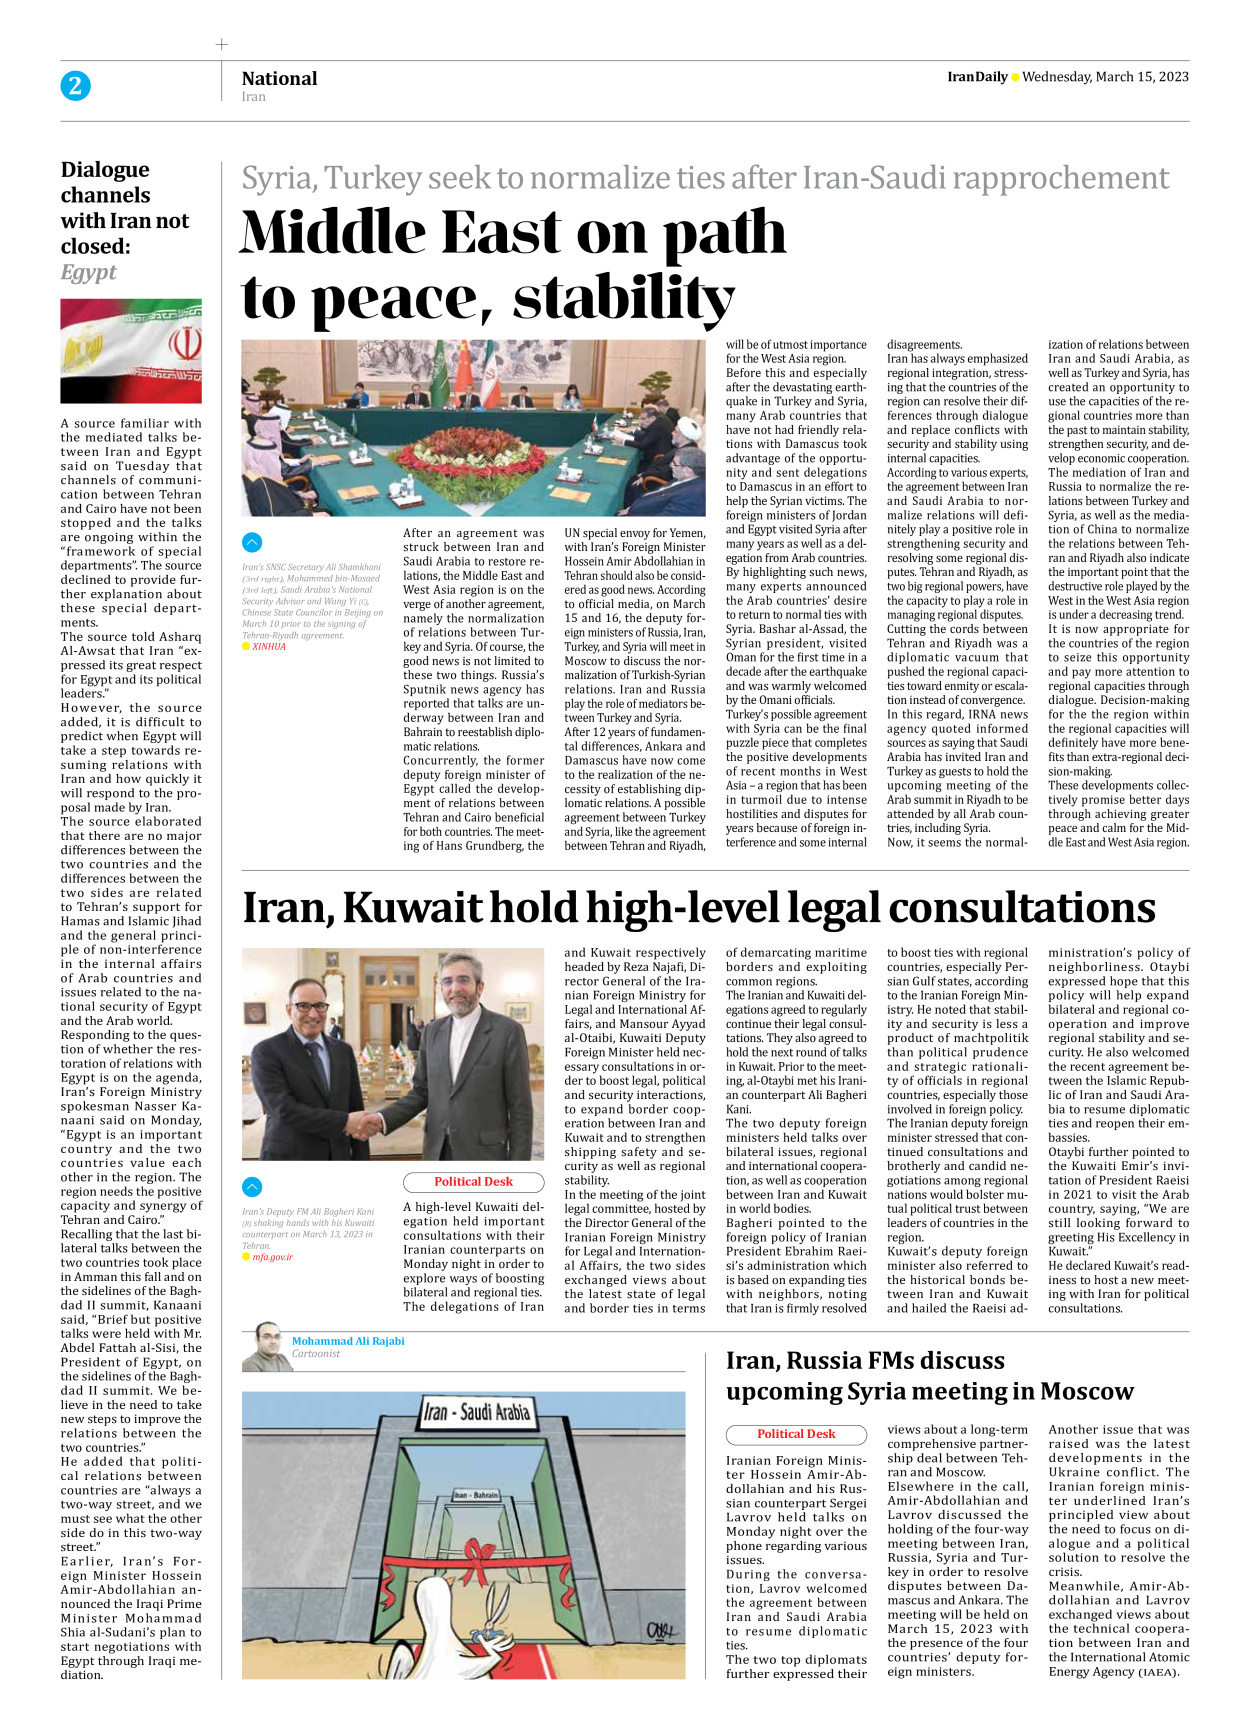 Iran Daily - Number Seven Thousand Two Hundred and Fifty Eight - 15 March 2023 - Page 2